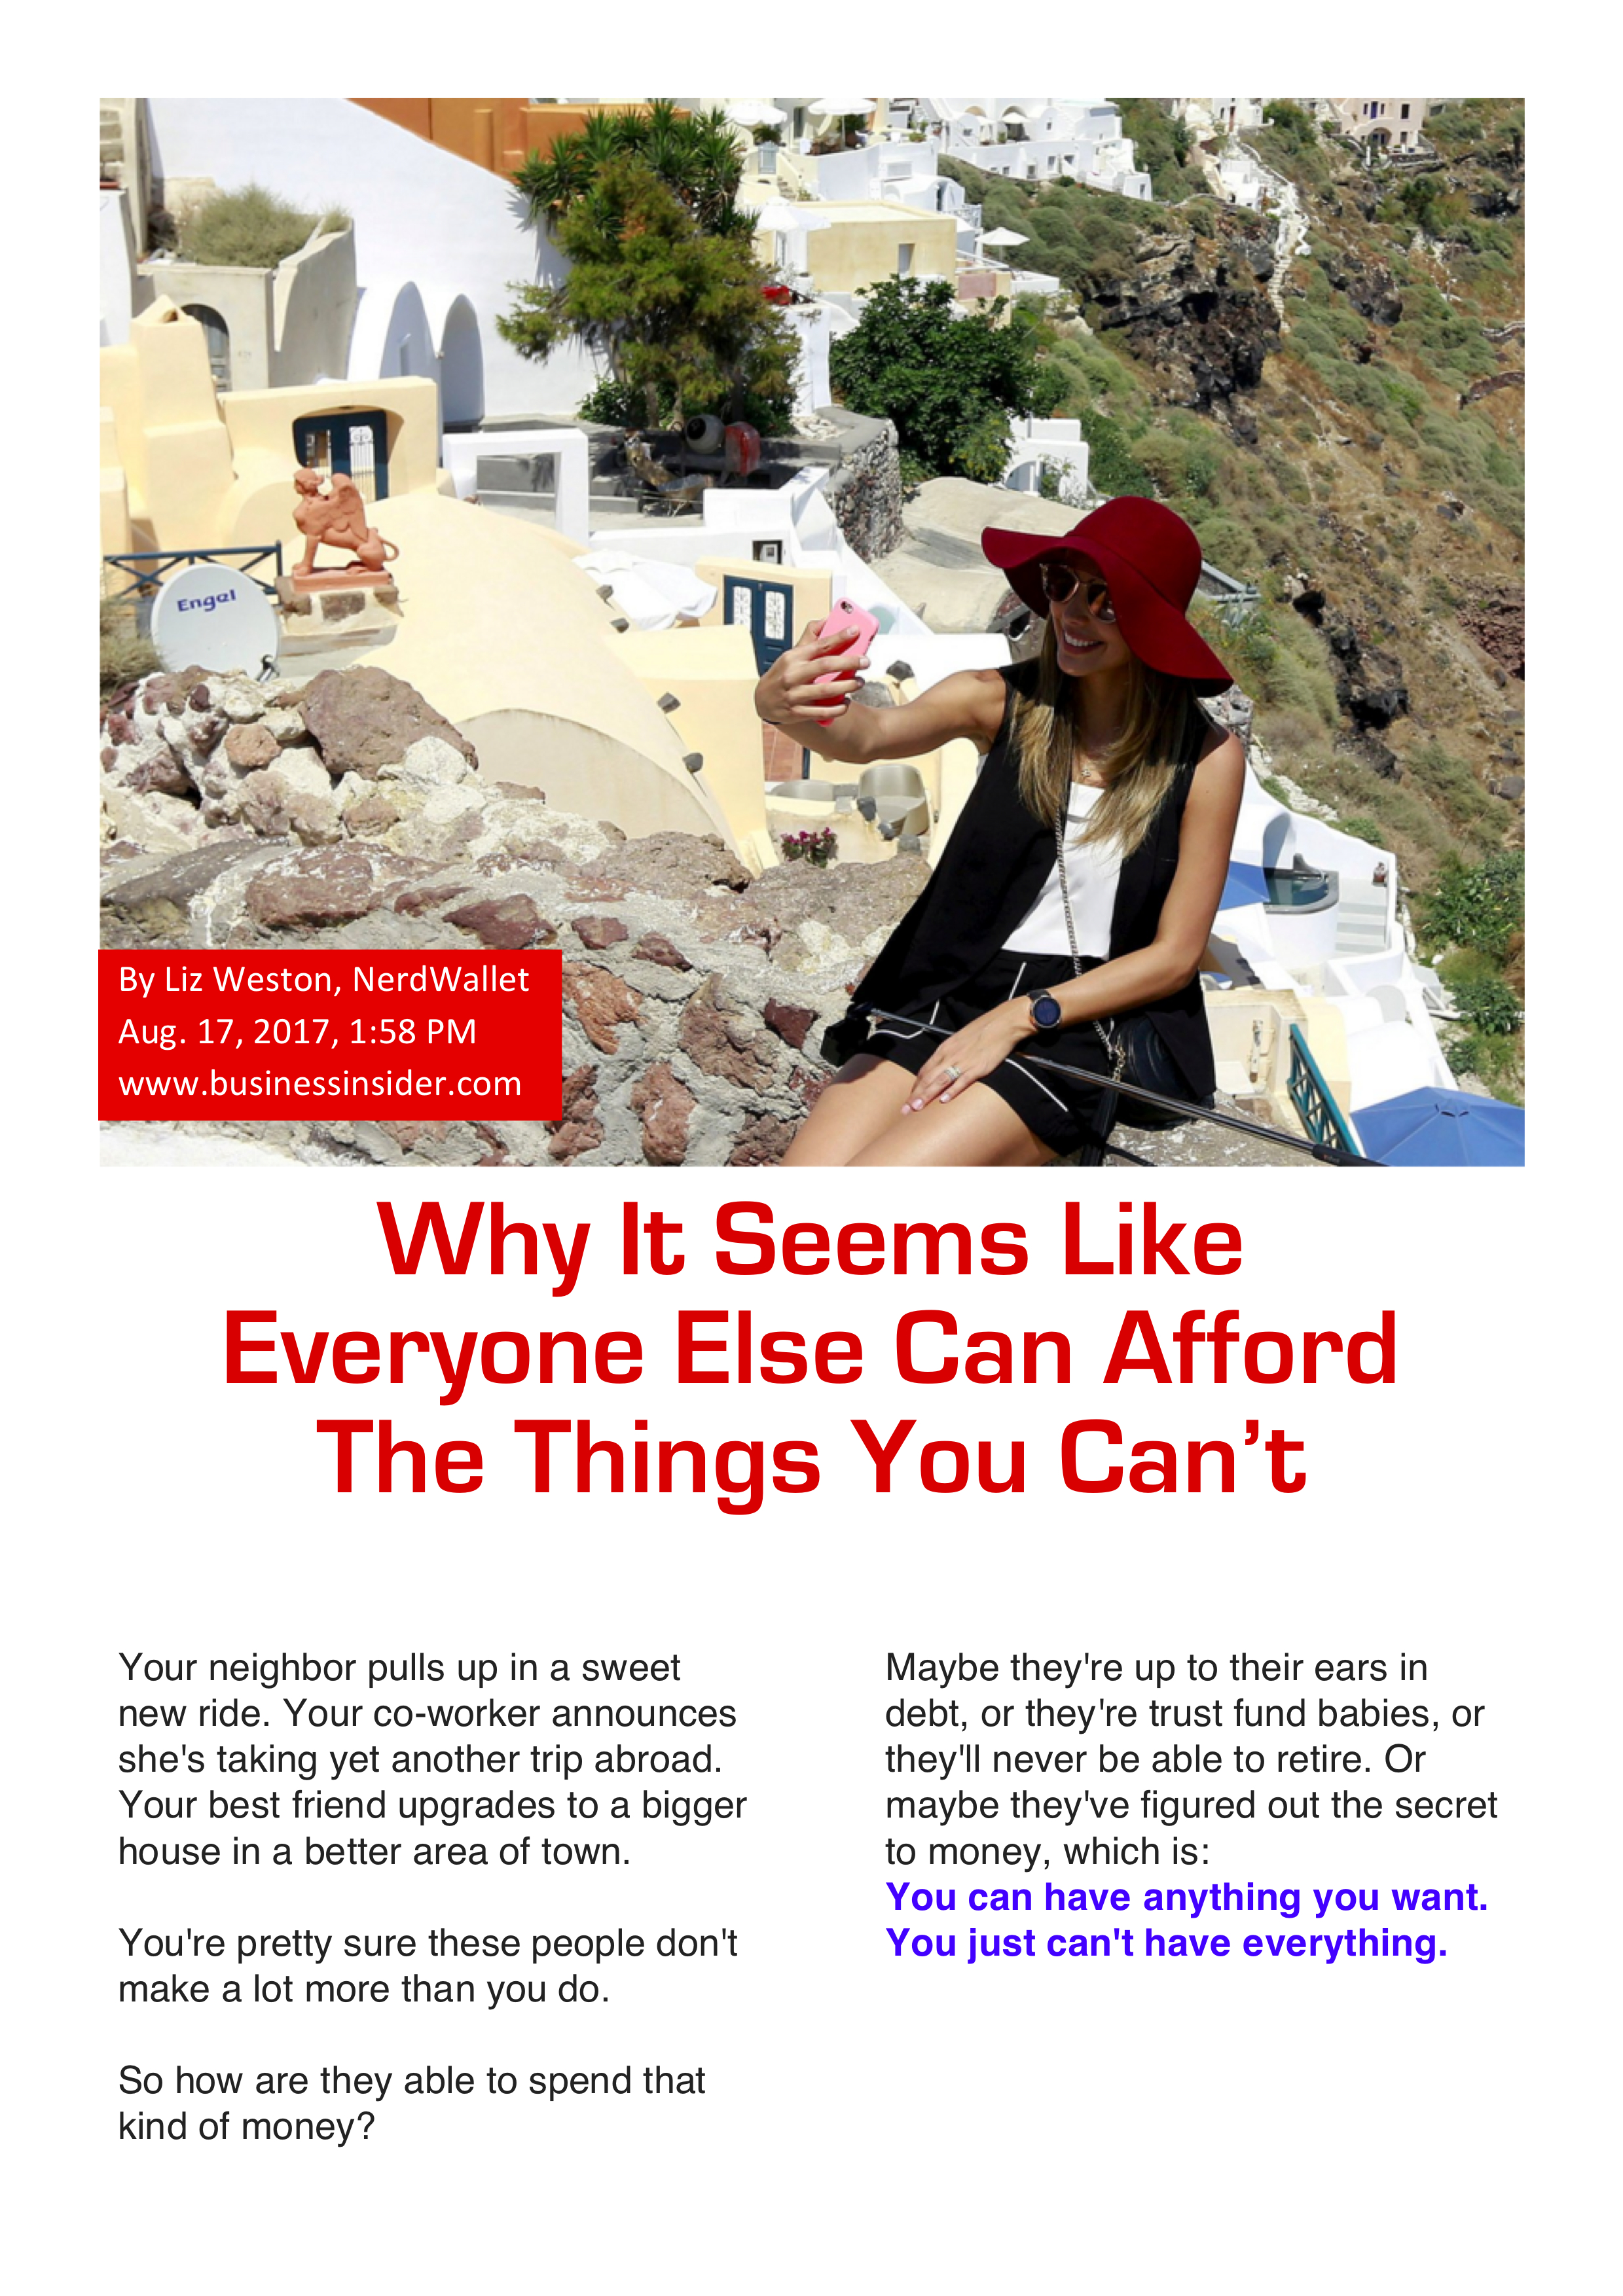 Why It Seems Like Everyone Else Can Afford The Things You Can’t